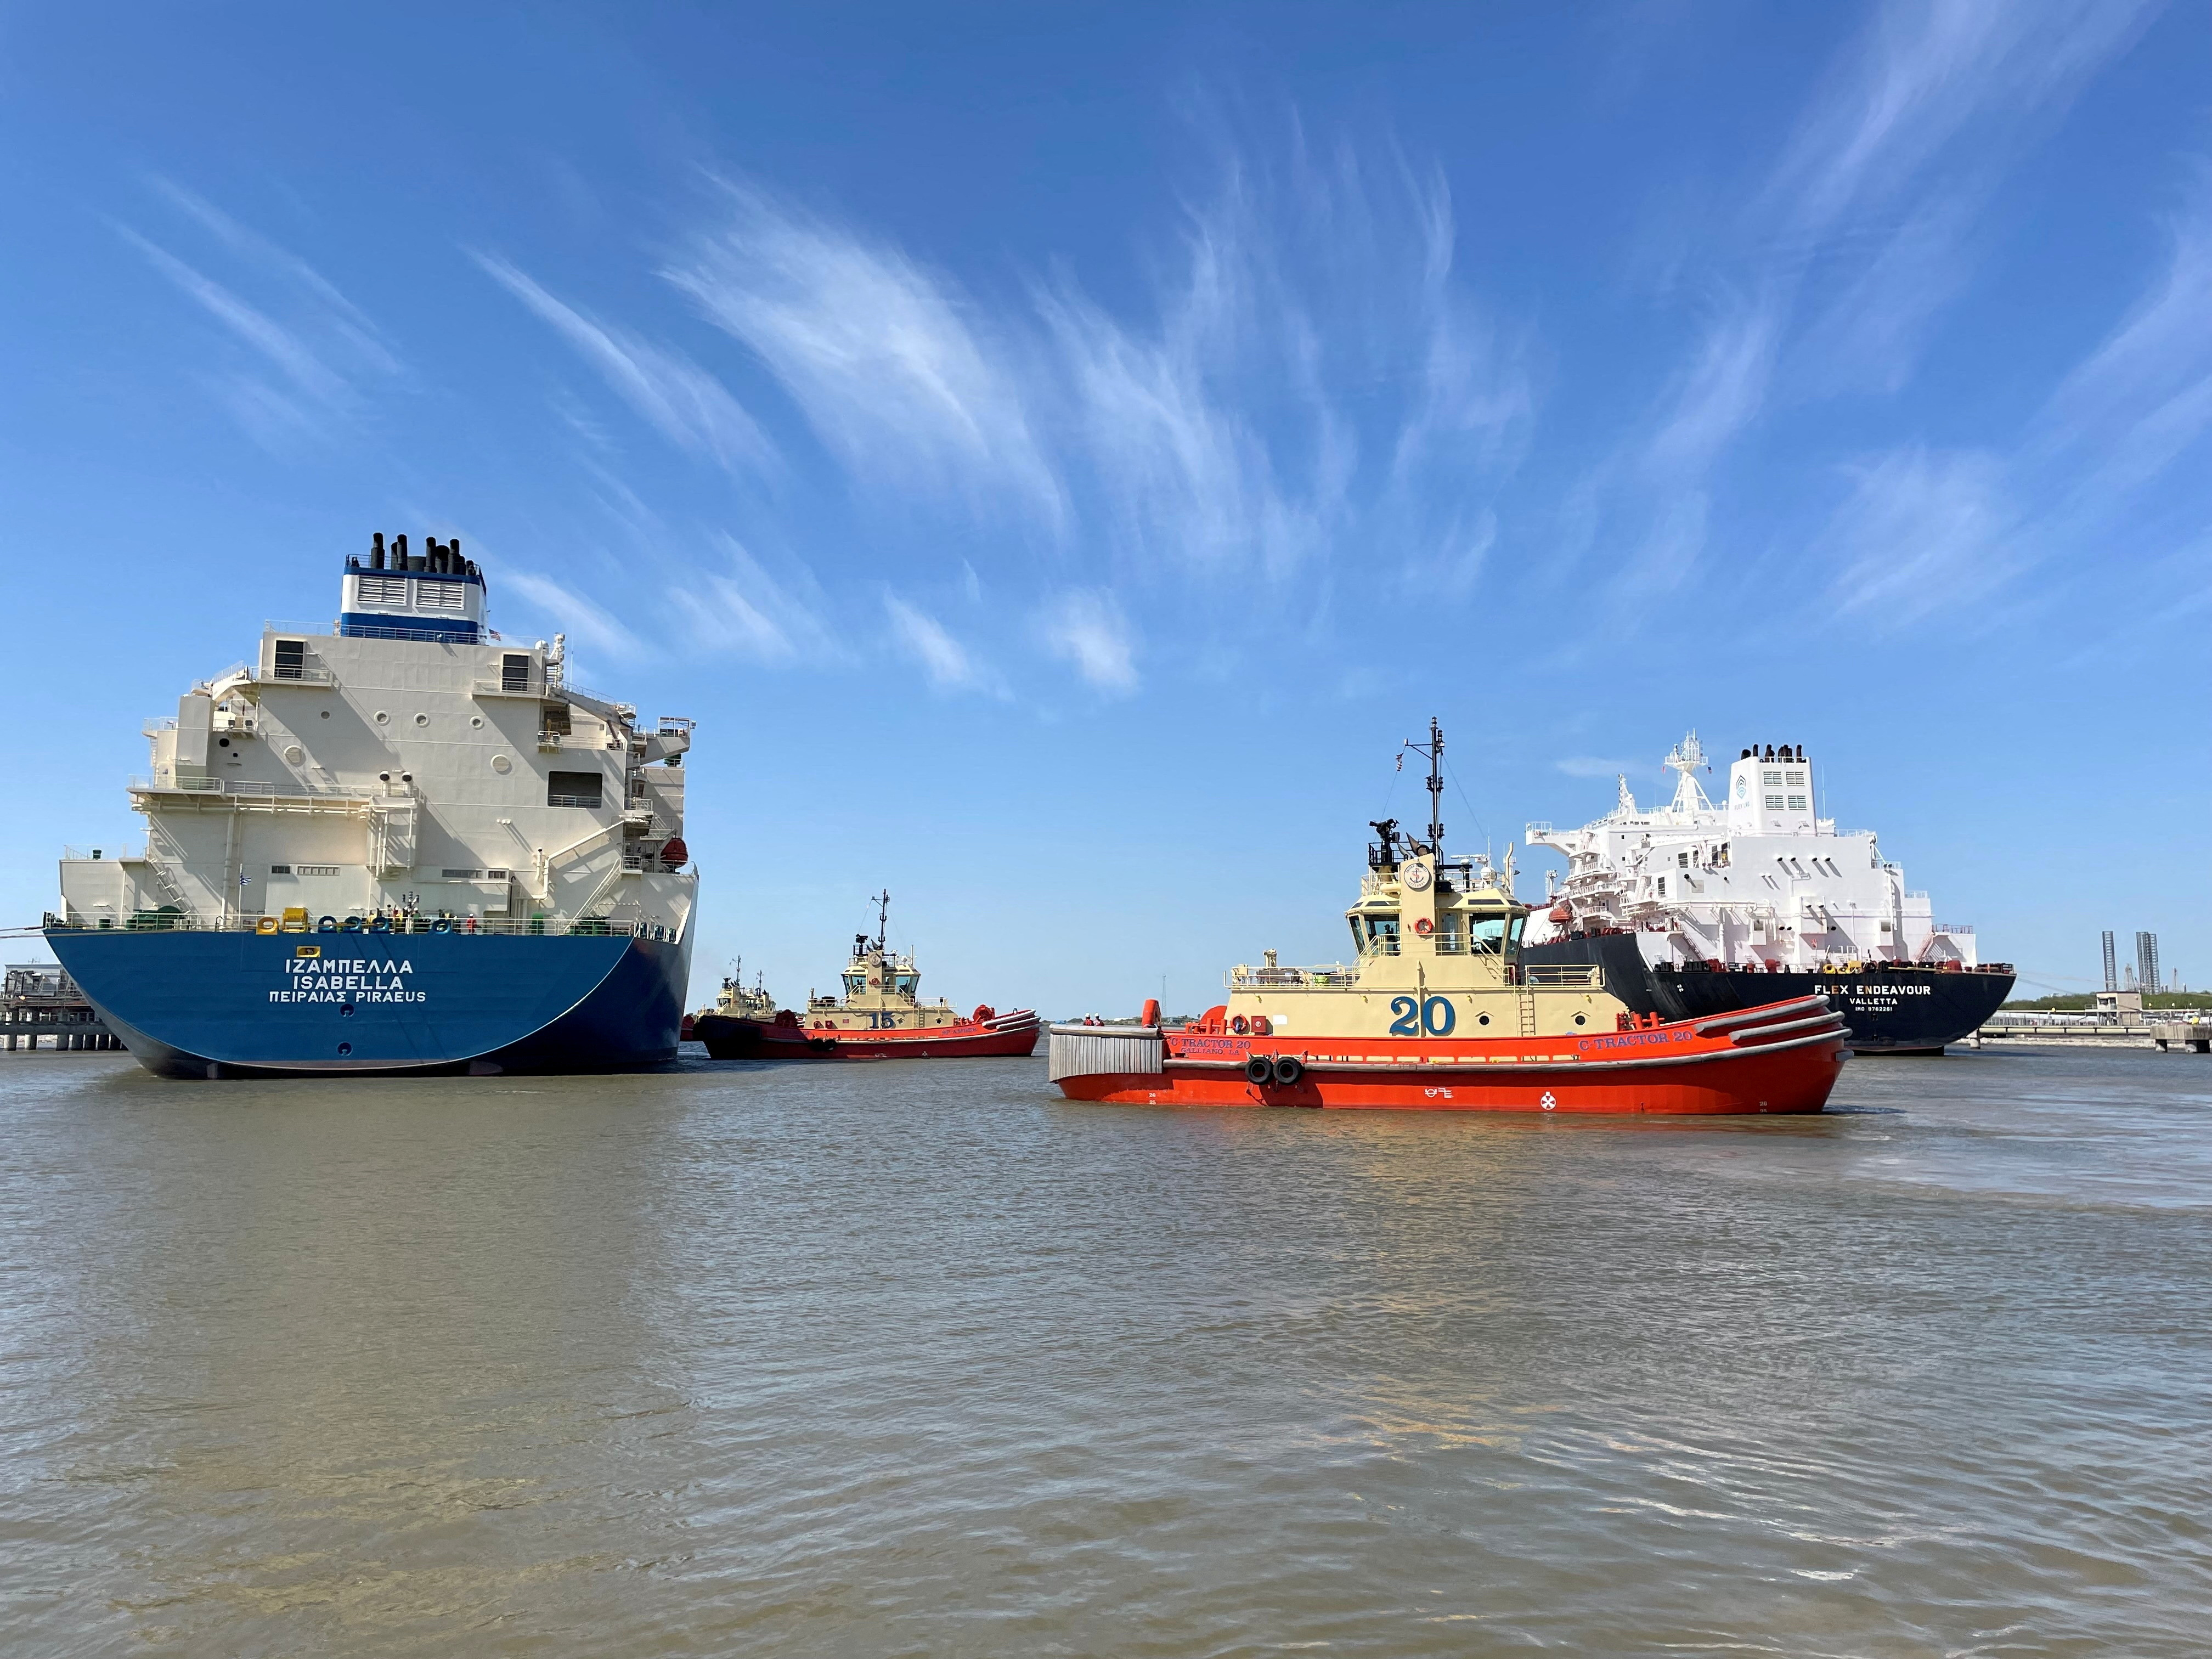 An LNG tanker is guided by tug boats at the Cheniere Sabine Pass LNG export unit in Cameron Parish, Louisiana